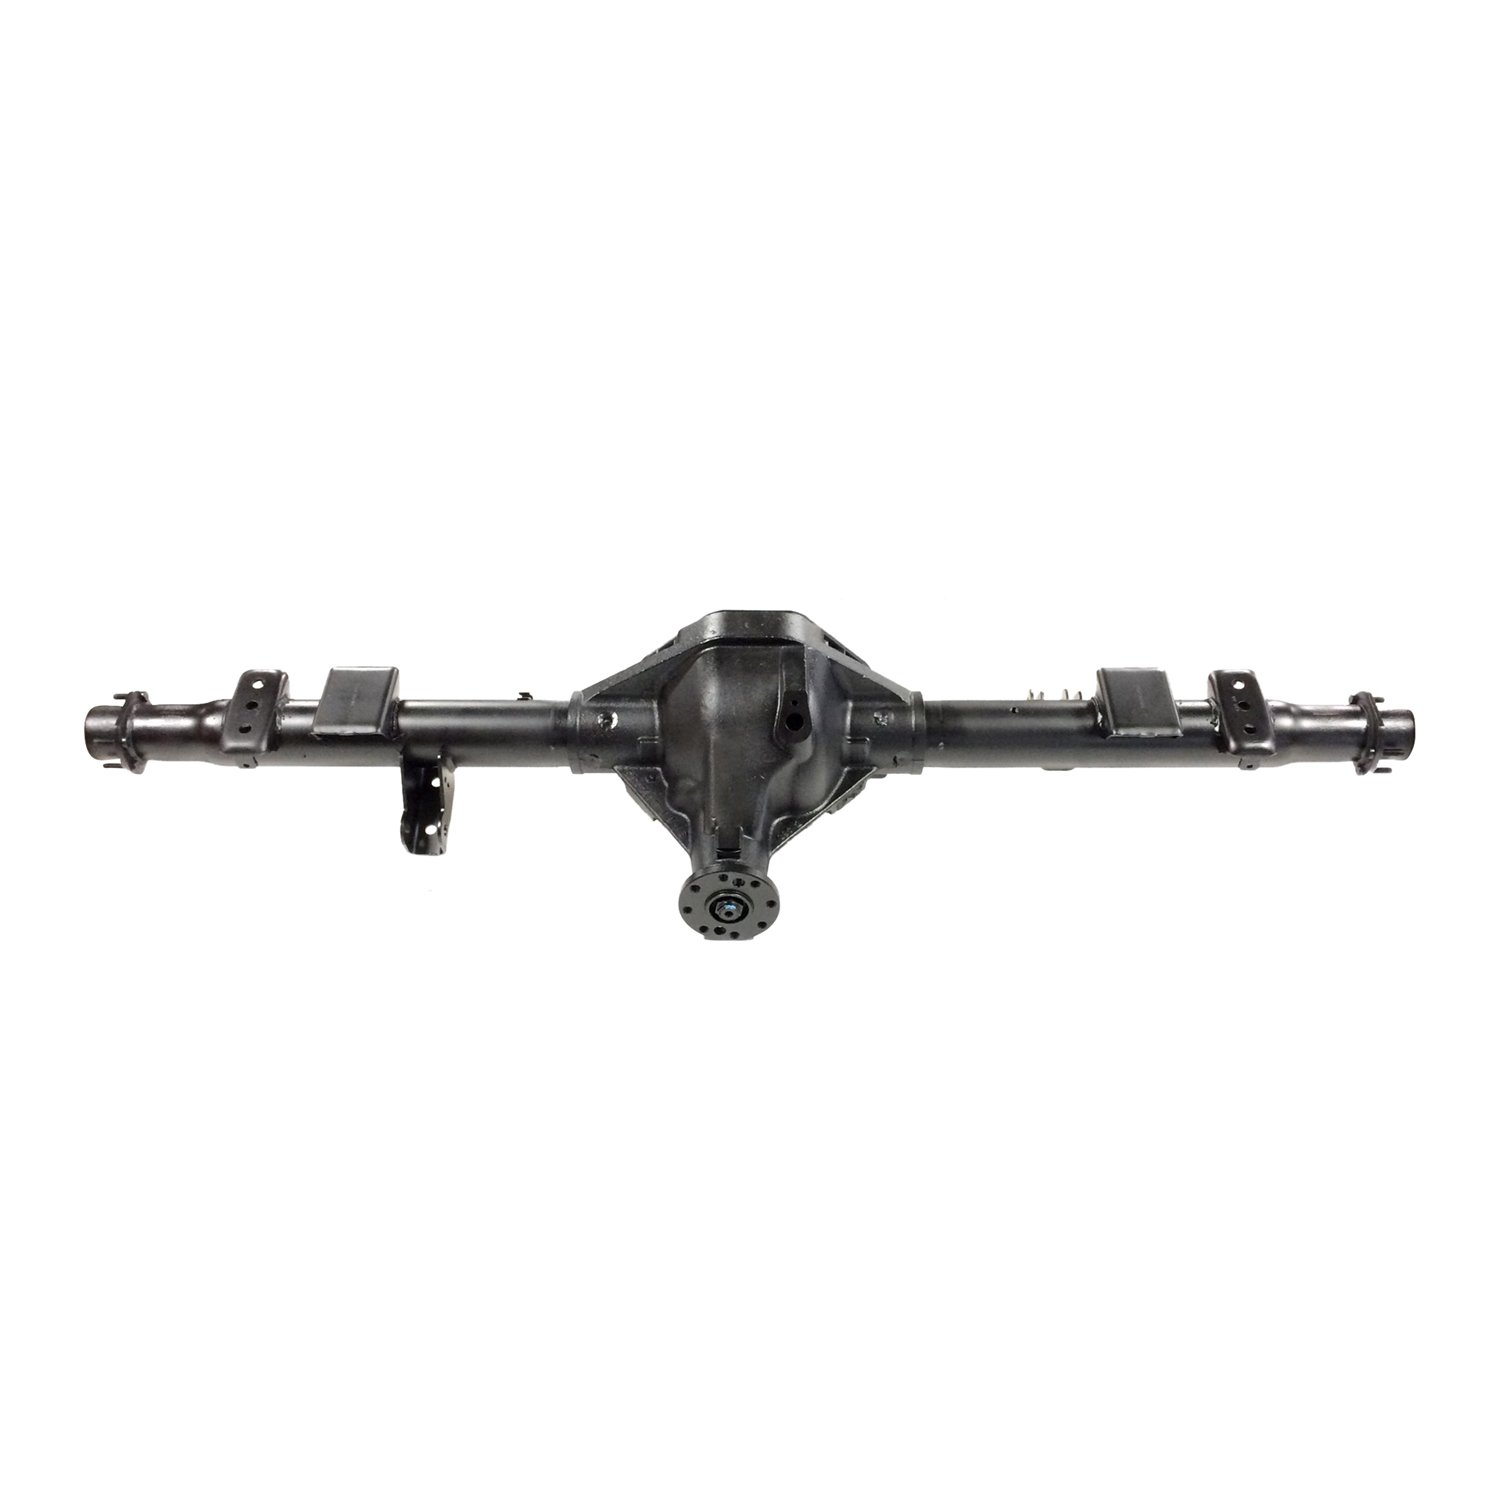 Remanufactured Complete Axle Assembly for Chy 9.25" 06-07 D1500 3.55 , 4x4, Posi LSD